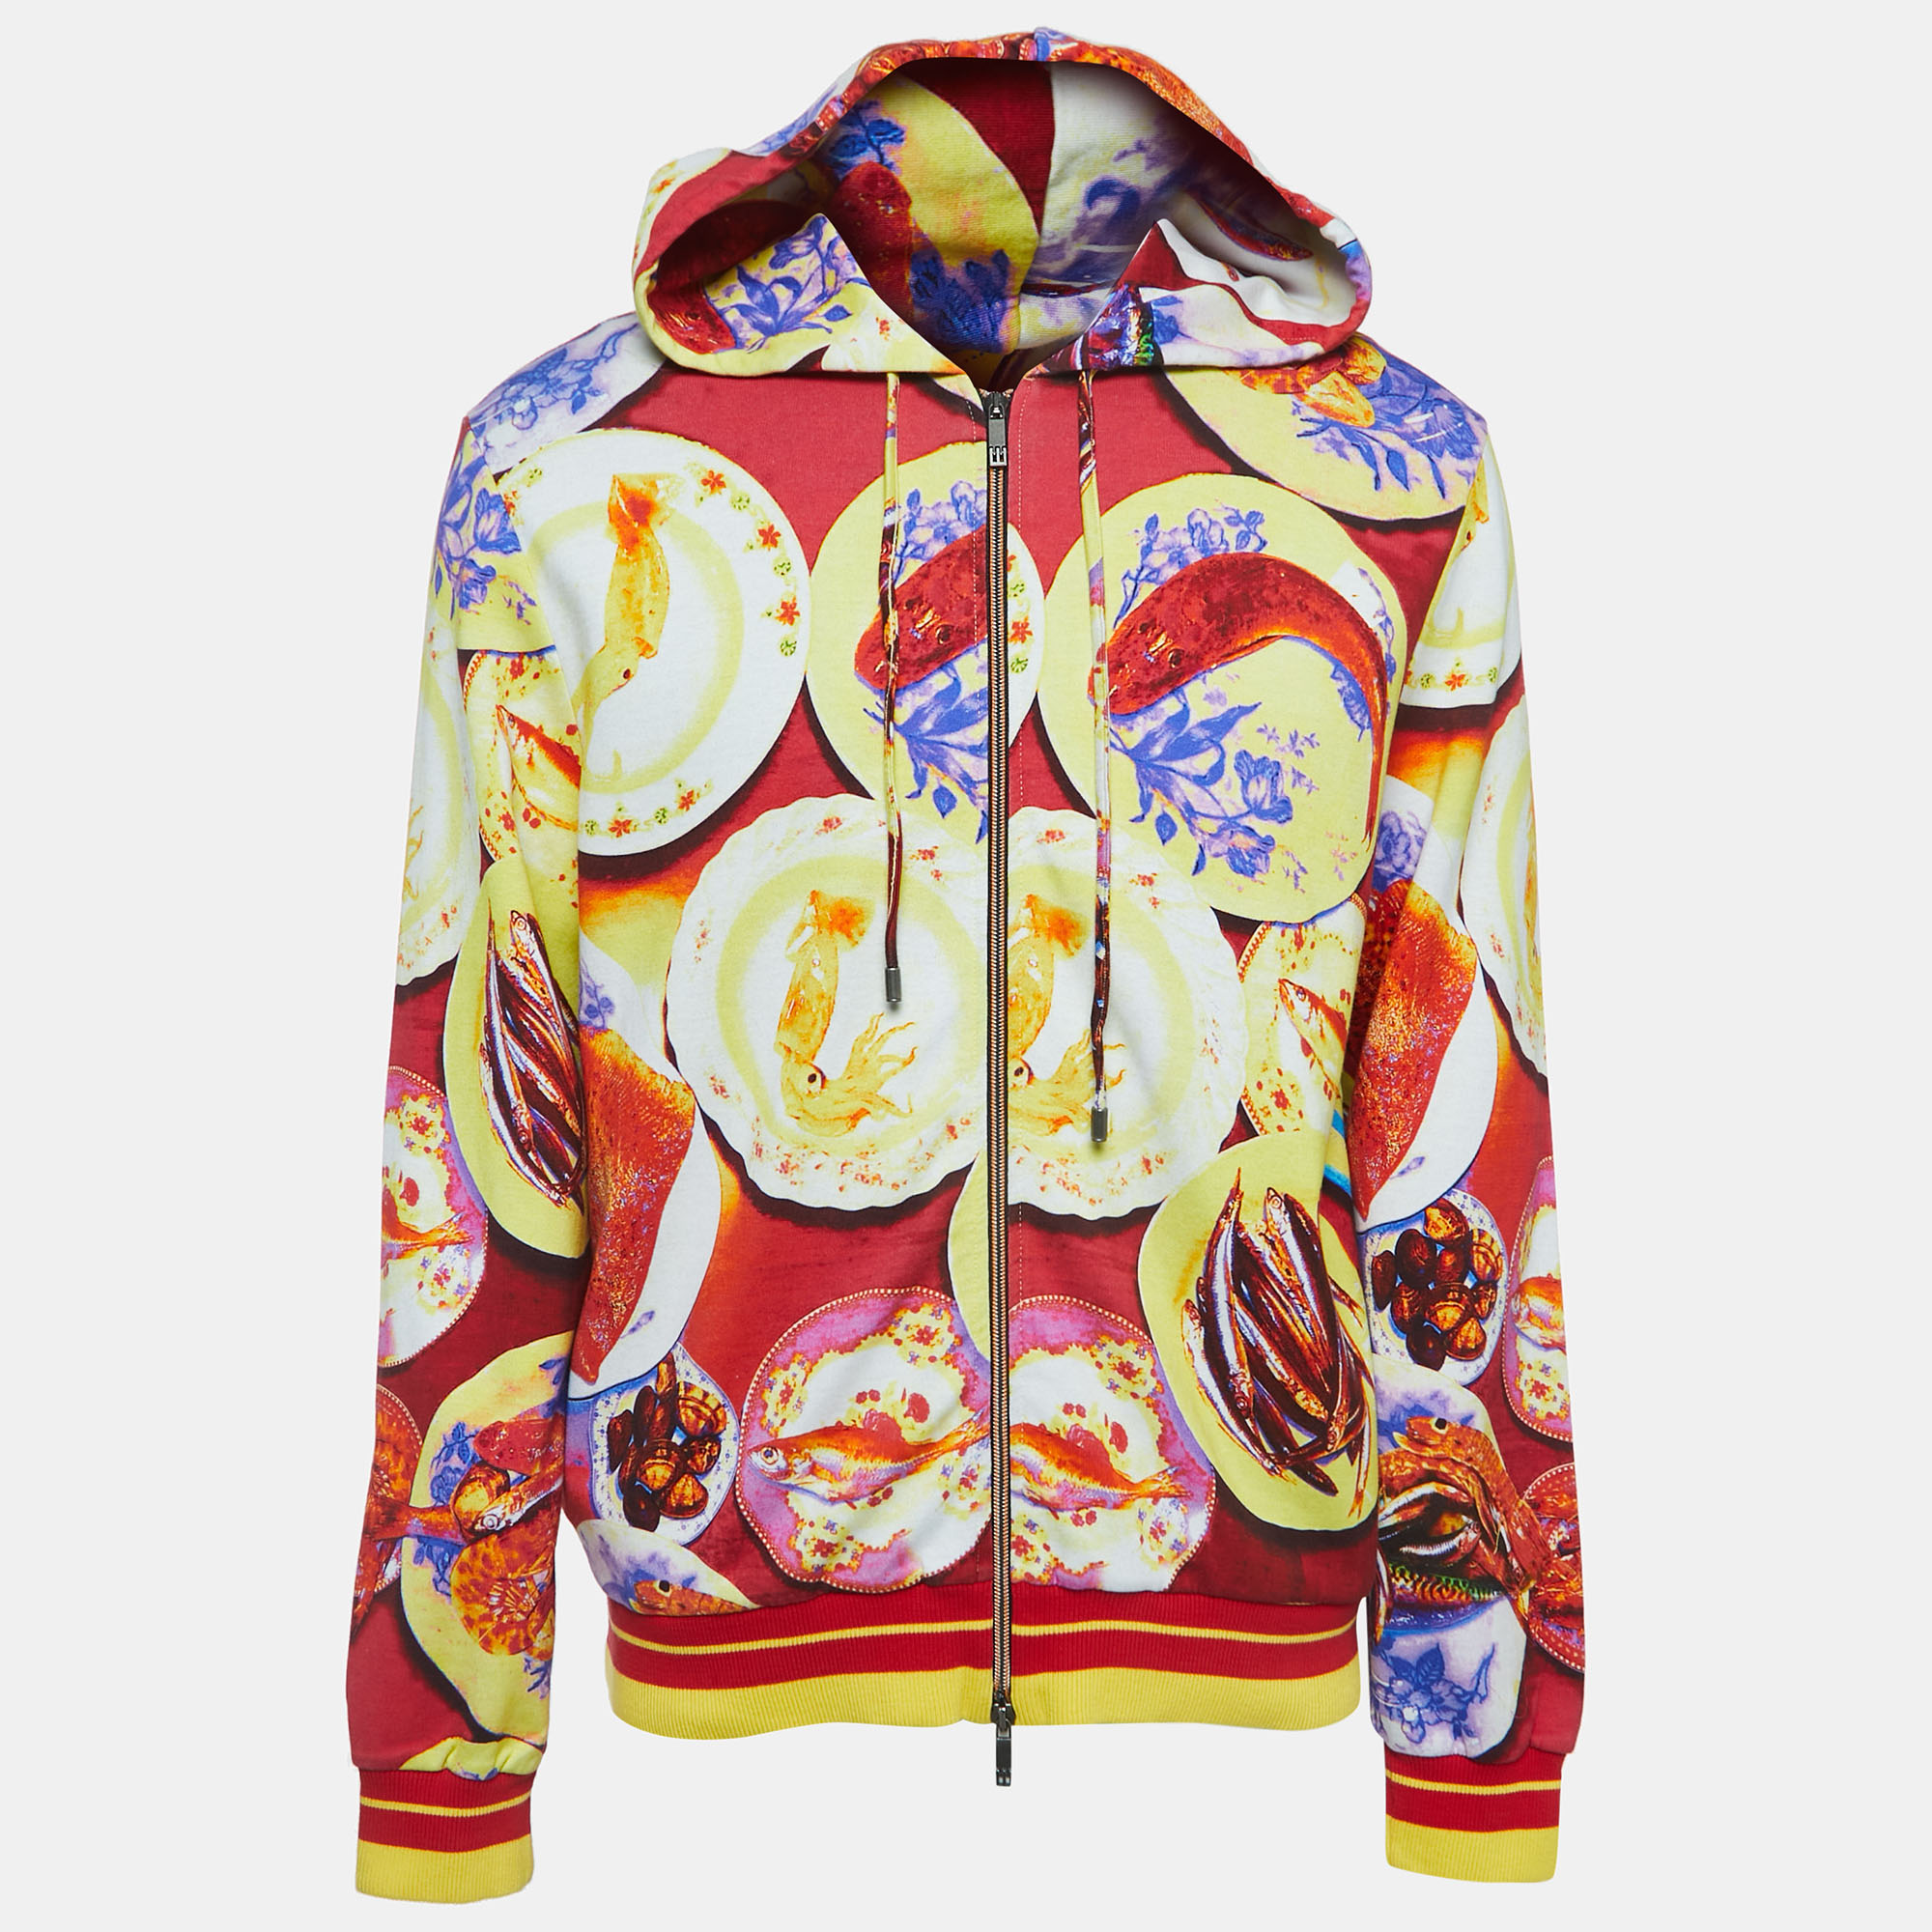 Etro Multicolor Seafood Print Jersey Zip Front Hooded Jacket XL